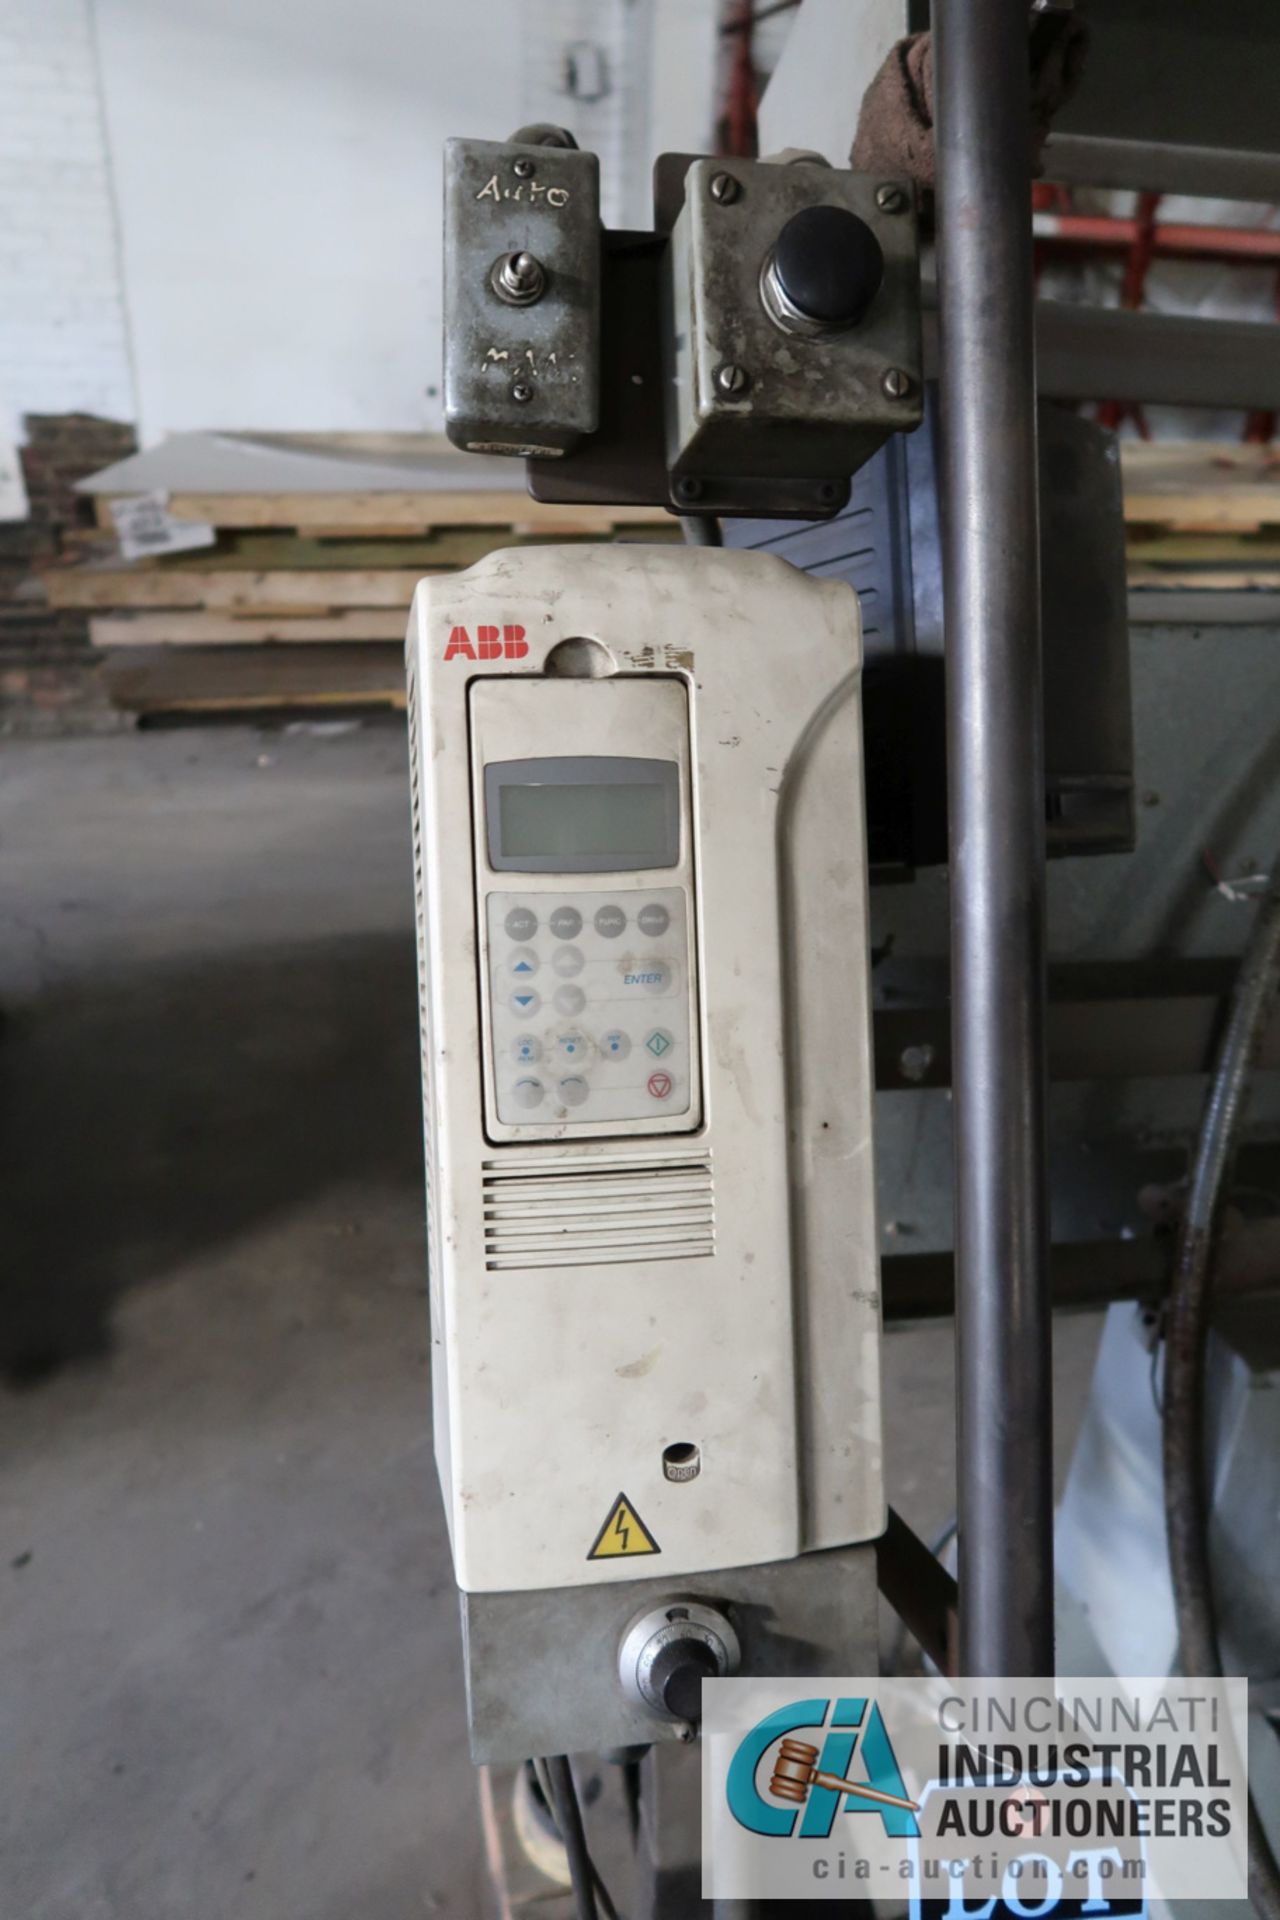 ABB CONTROL STAND CONTROLS BOTH 35 TON OBI PRESS AND ROLLFORMER **LOADING FEE DUE THE "ERRA" GRG - Image 2 of 4